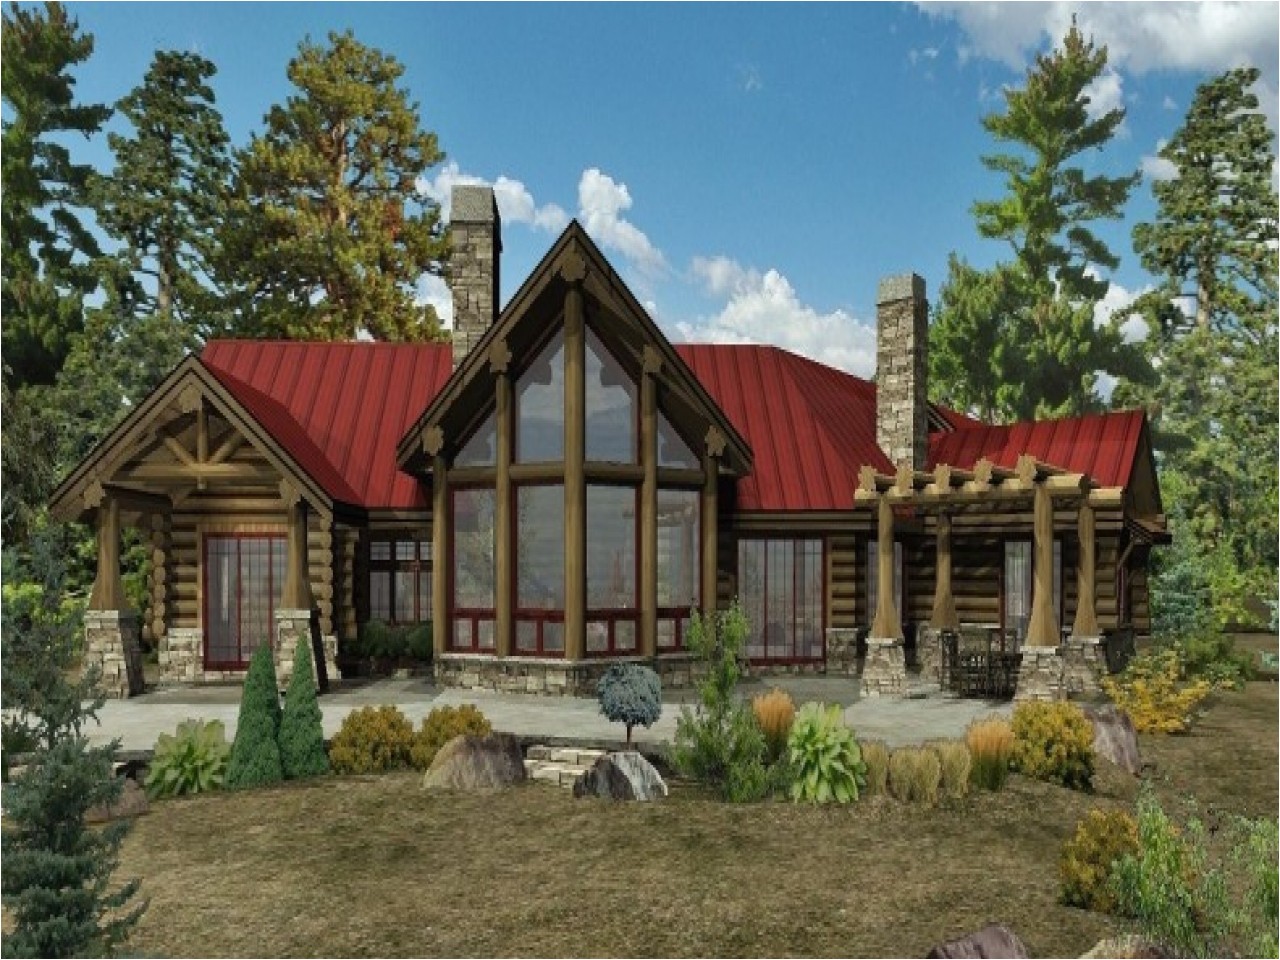 Log Home Plans Tennessee Tennessee Log Home Floor Plans Home Design and Style